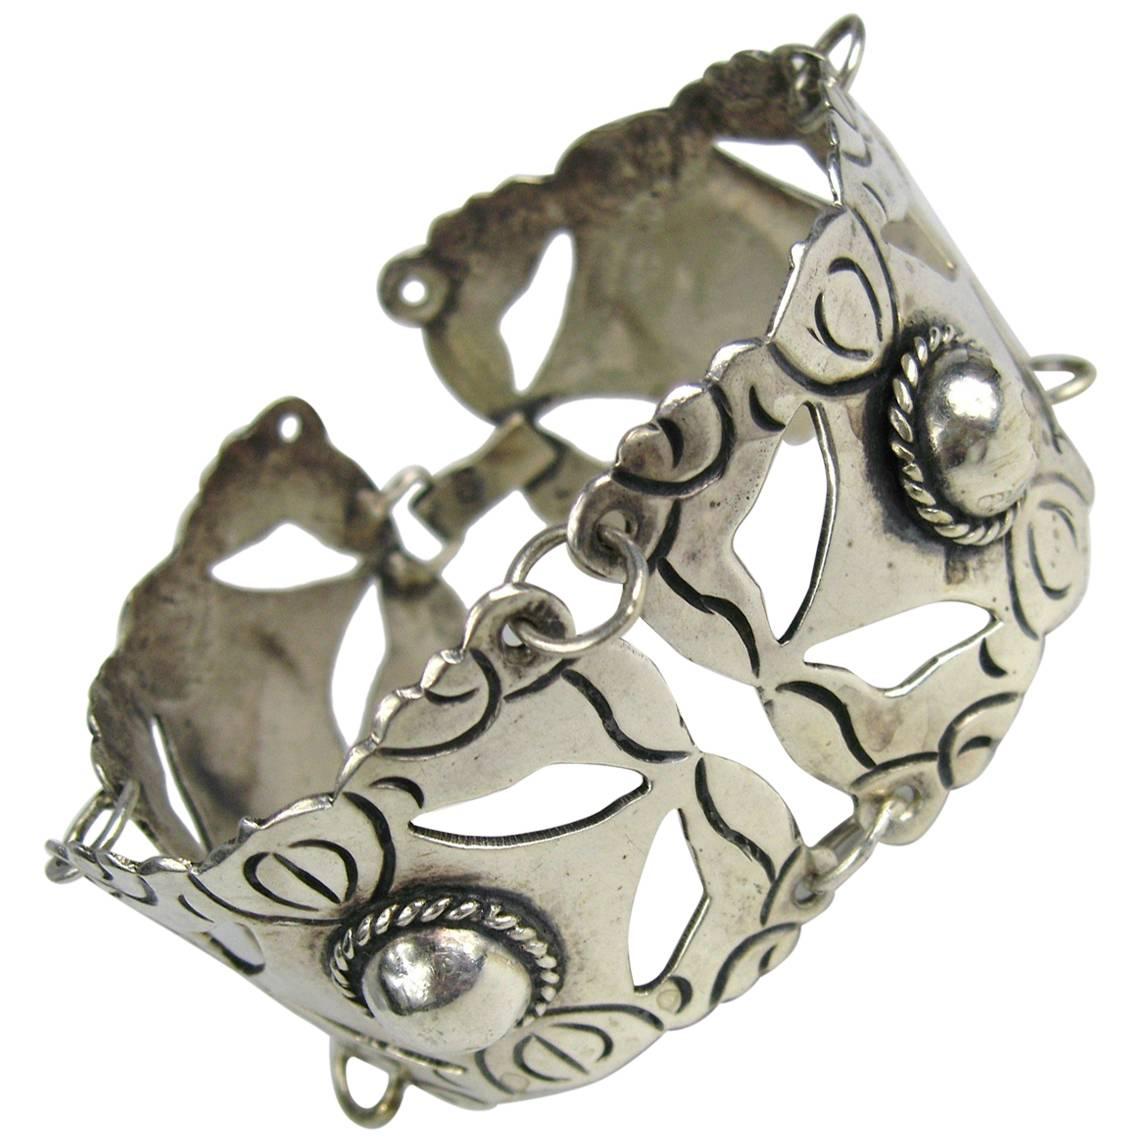 Vintage Mexican Silver - 26 For Sale on 1stDibs